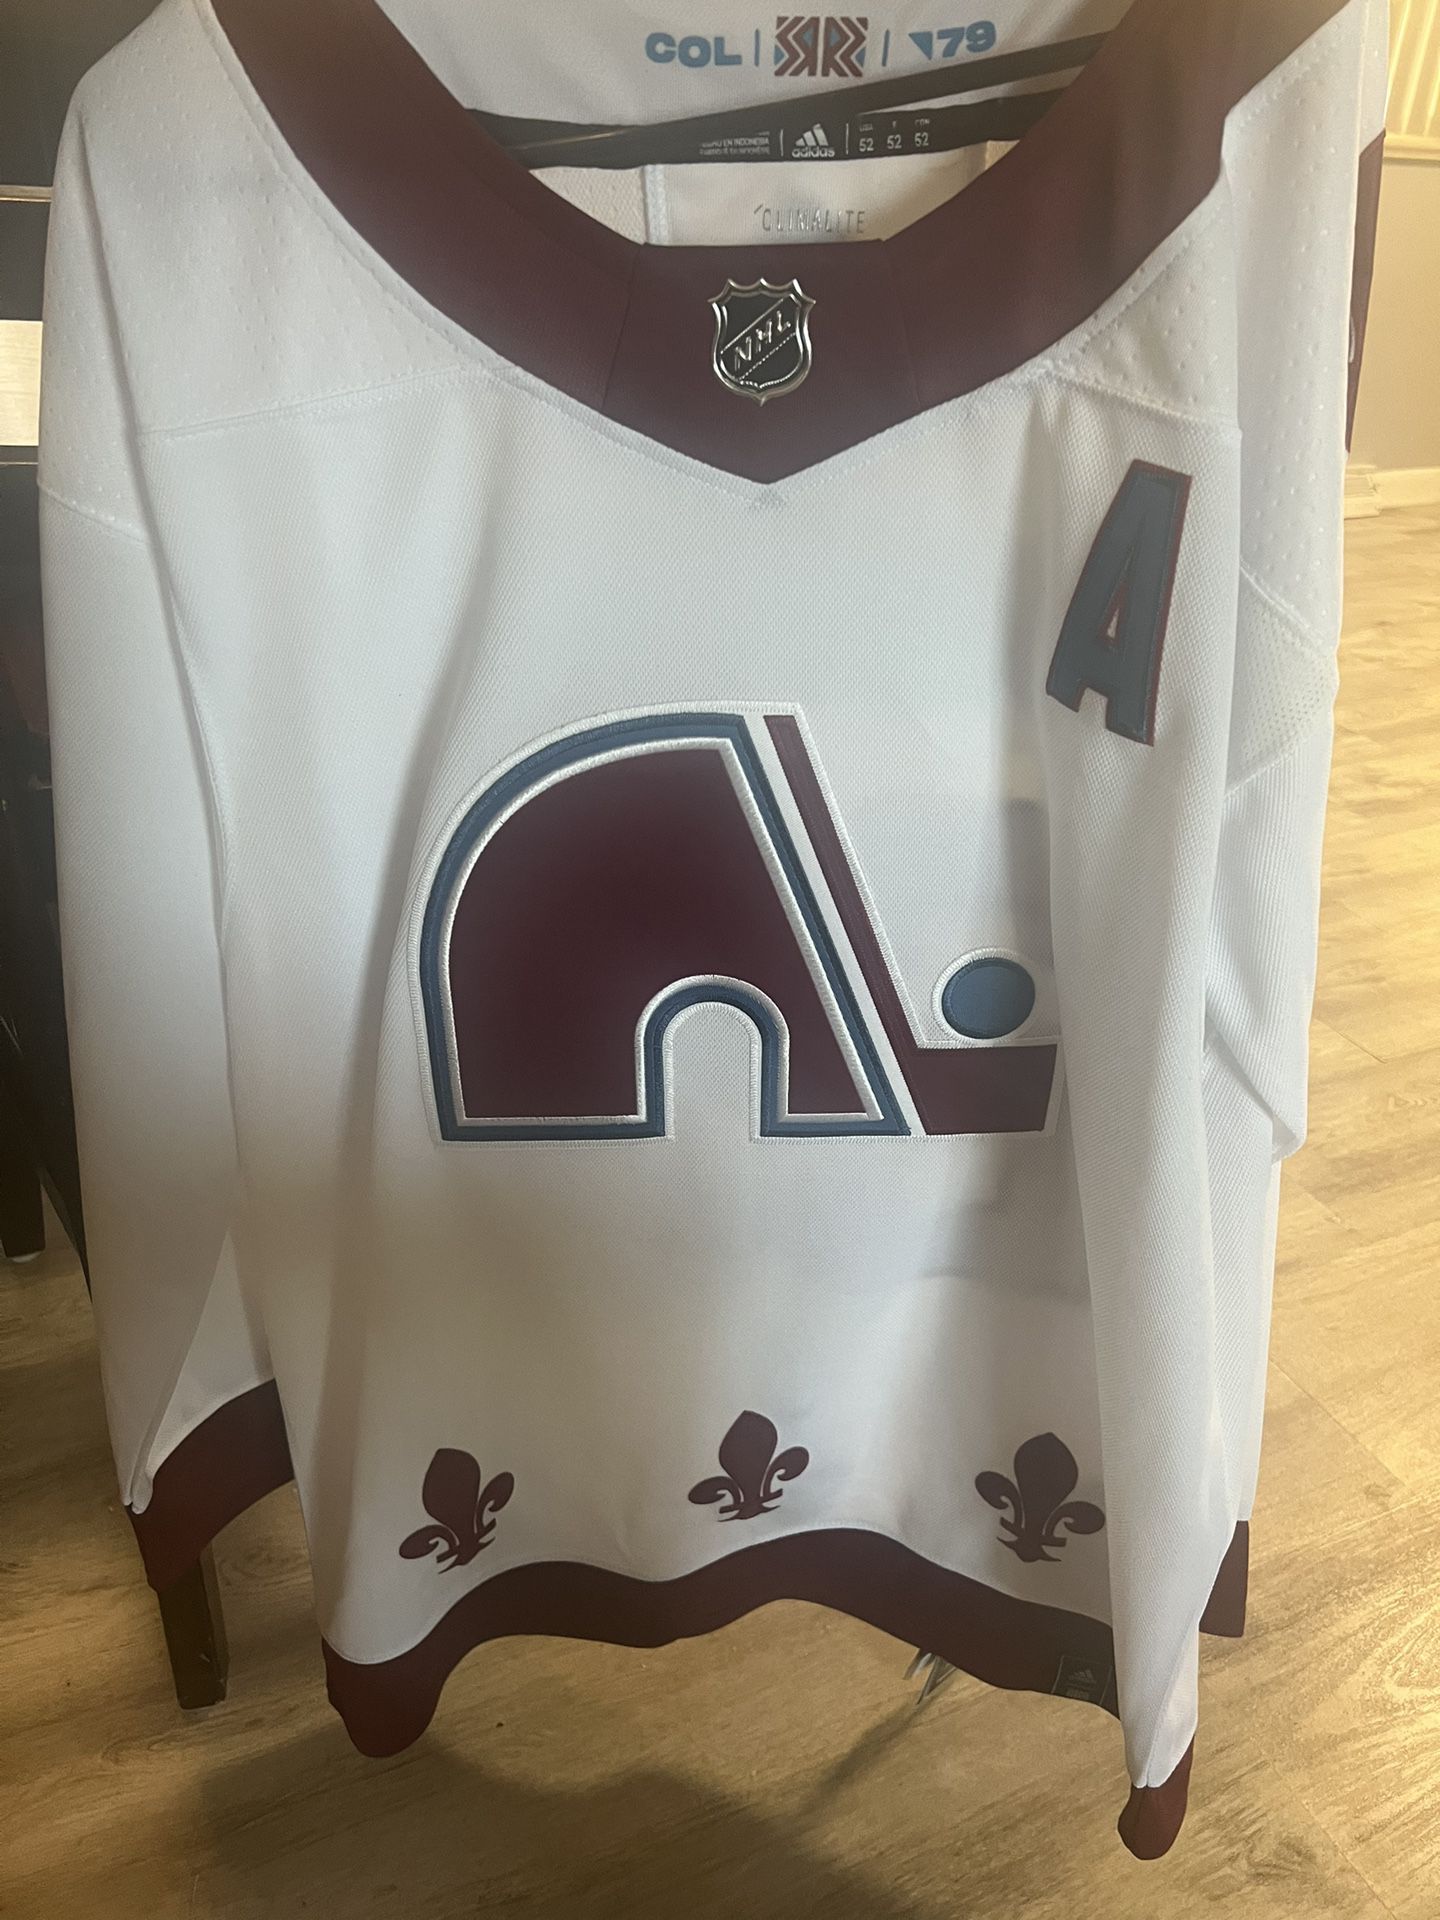 Nathan Mackinnon Reverse Retro 1.0 (L) for Sale in Parker, CO - OfferUp